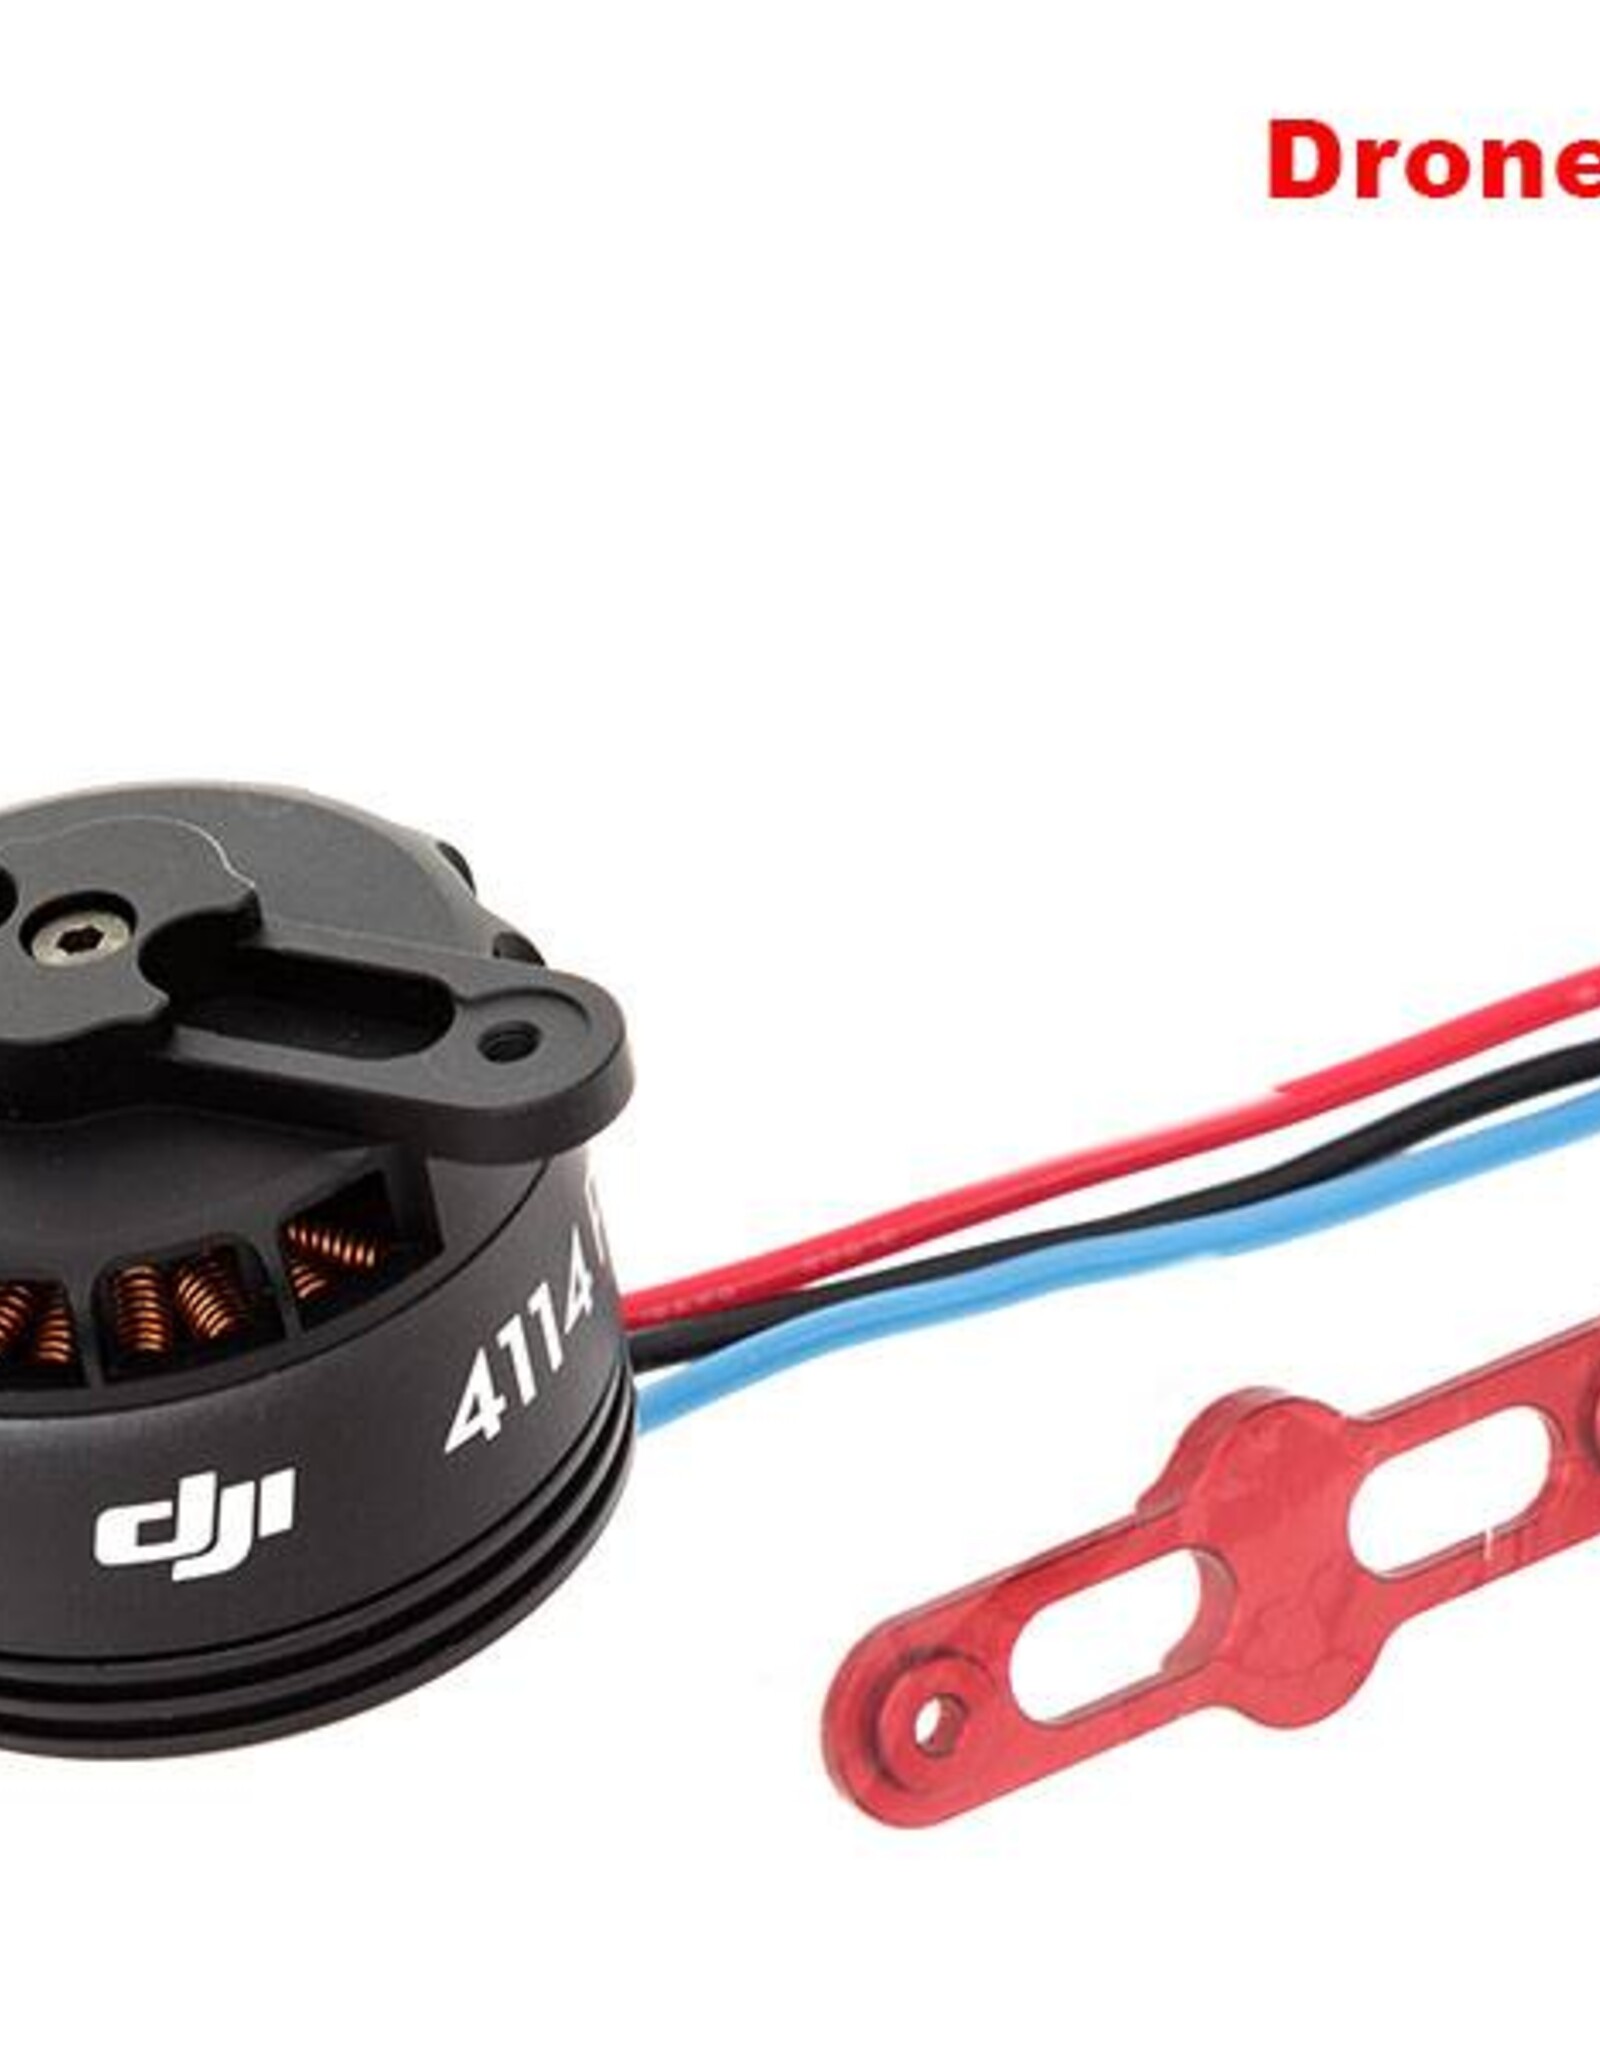 DJI DJI S900 4114 Motor With Red Prop Cover (Part 22)